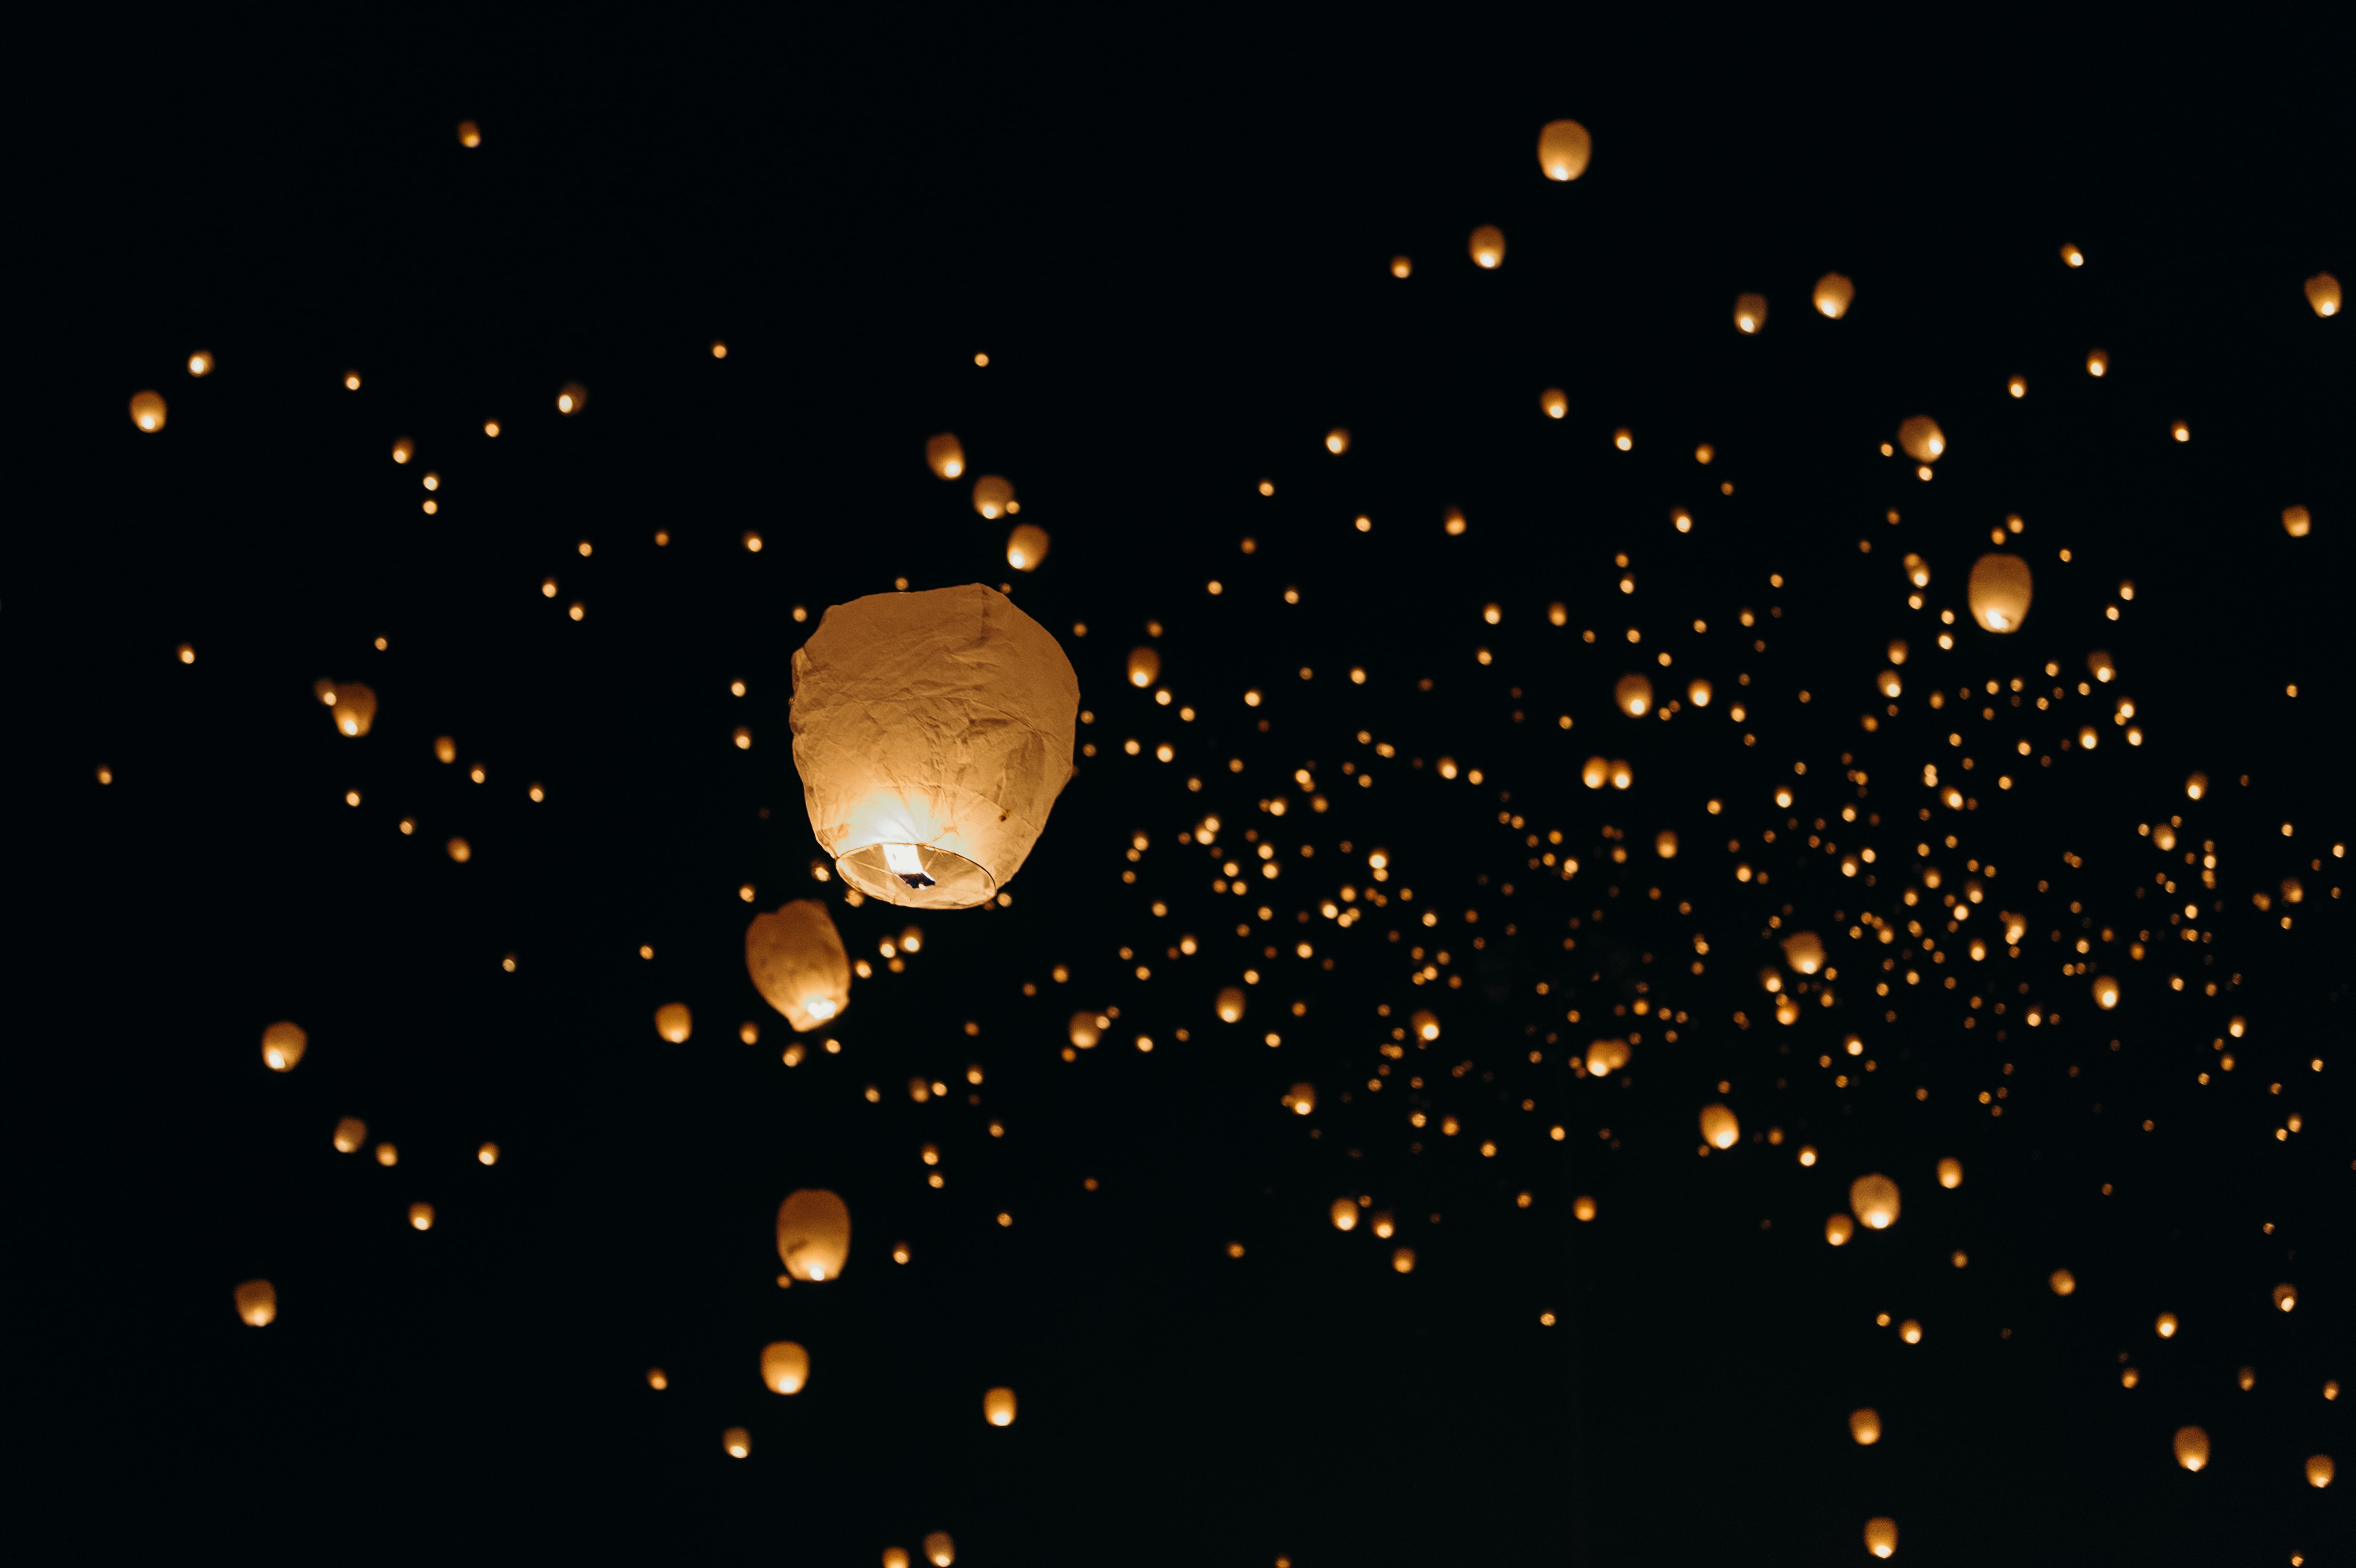  Thousands of lanterns into the night sky 